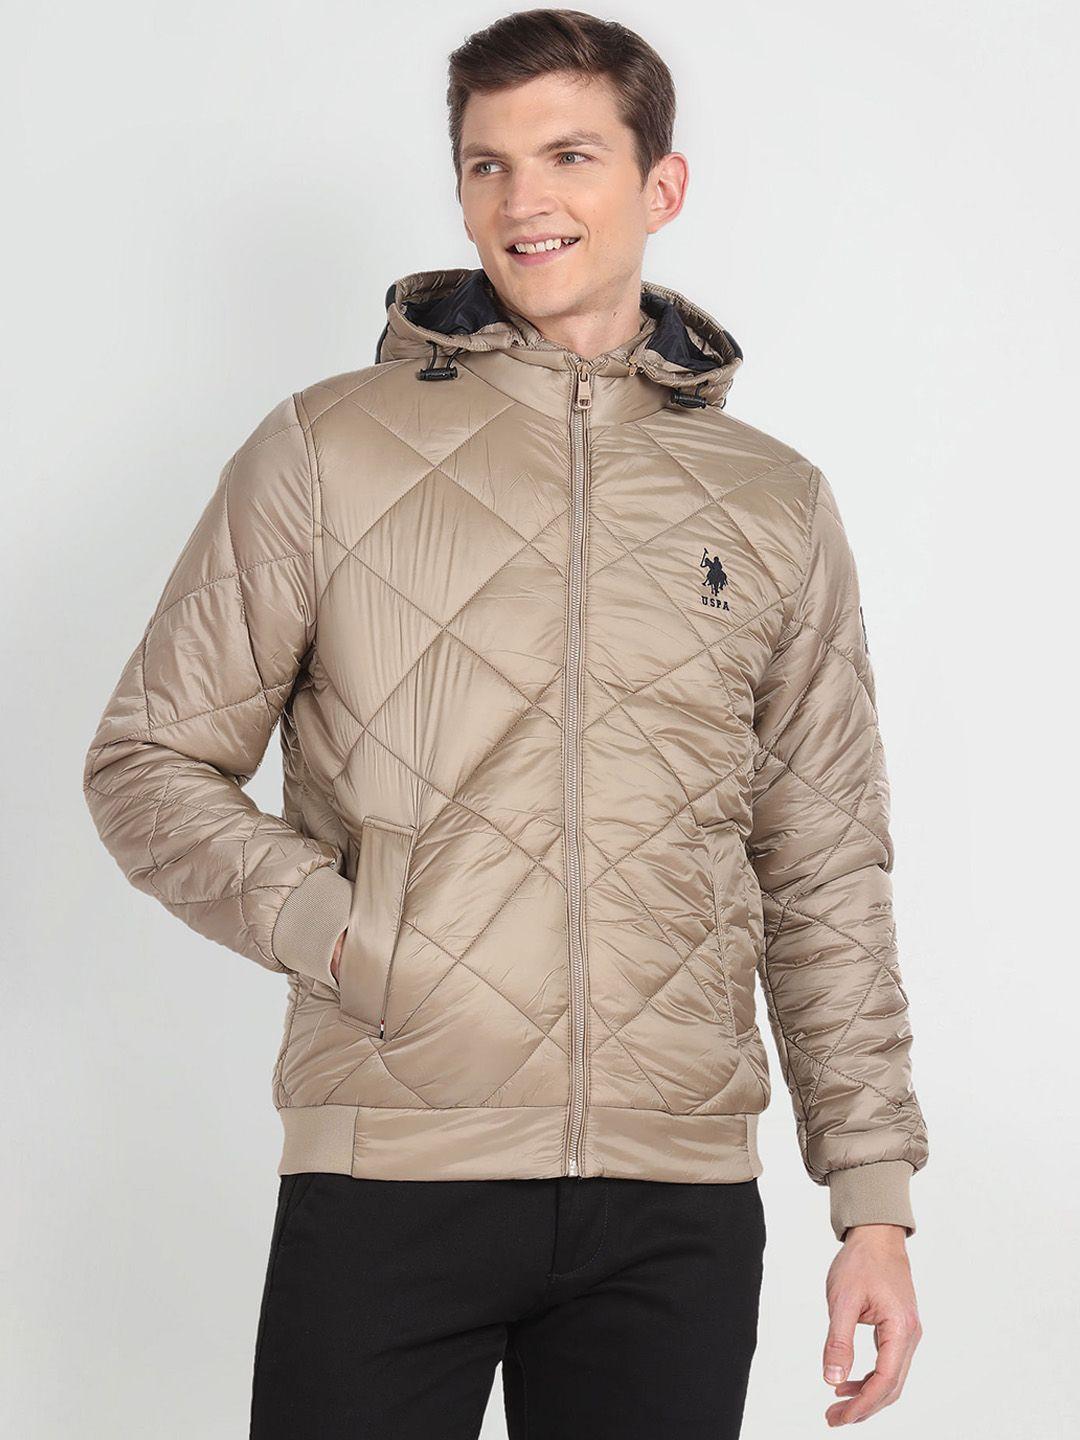 u.s. polo assn. denim co. hooded quilted jacket